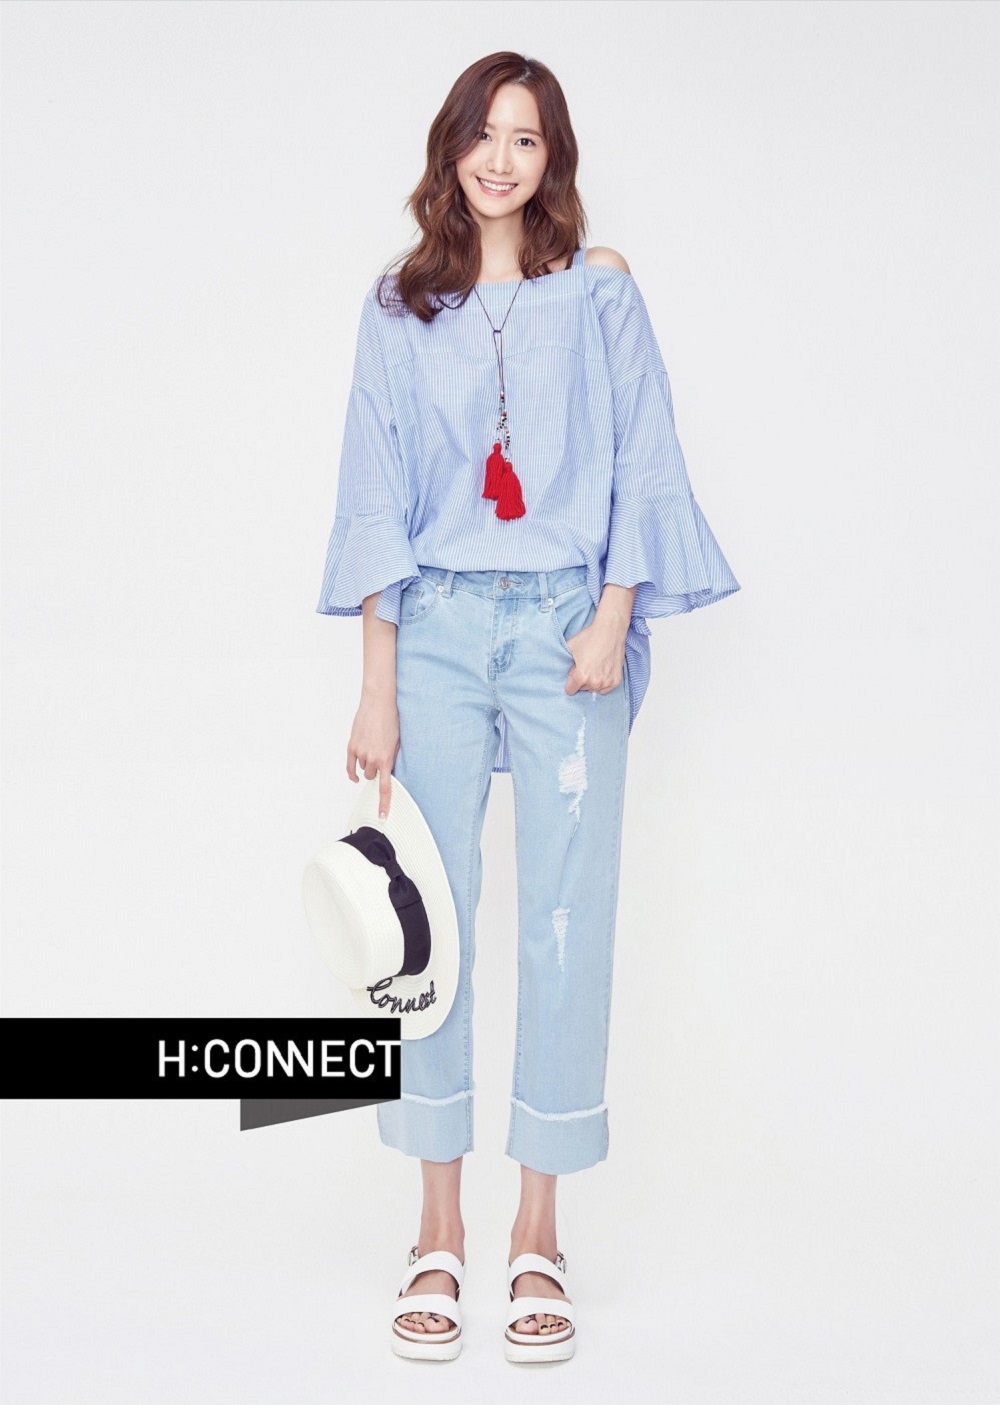 20160622_HCONNECT_SNSD-YoonA (6)